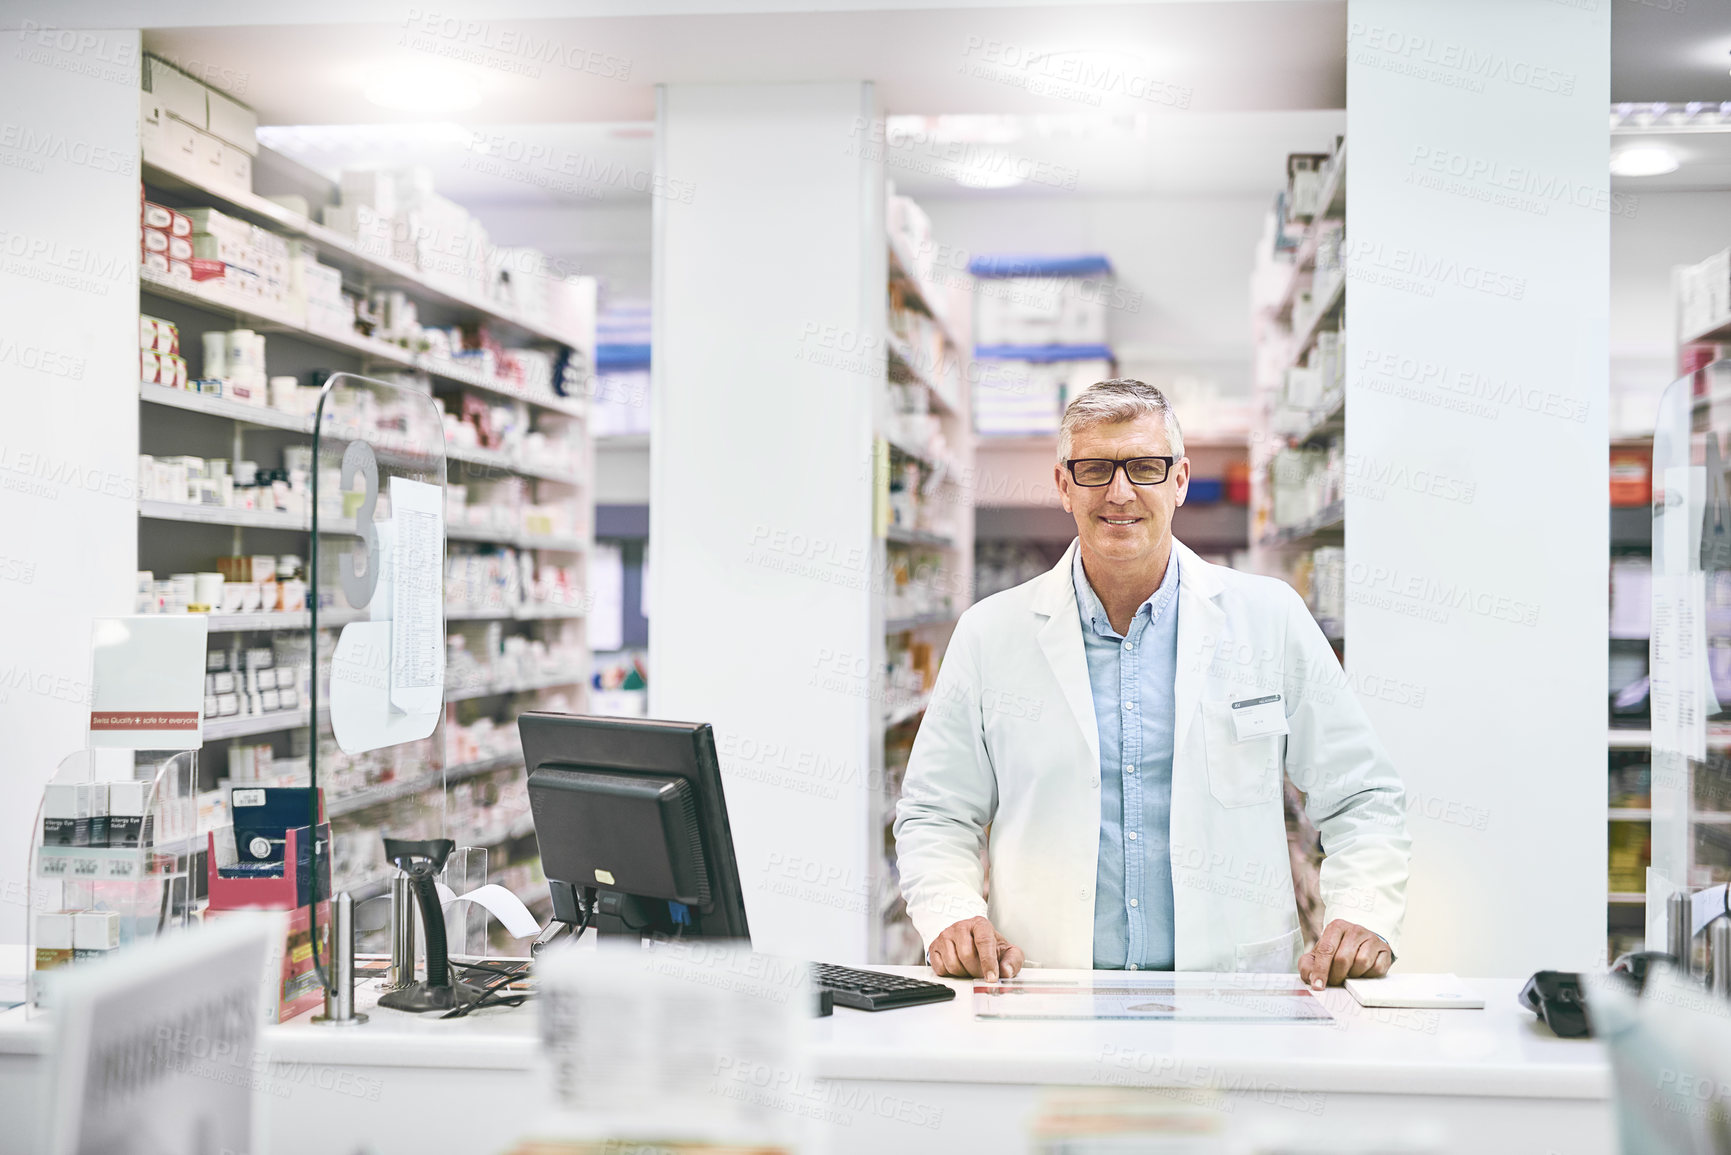 Buy stock photo Portrait of a cheerful mature male pharmacist standing behind the counter while looking at the camera in a pharmacy